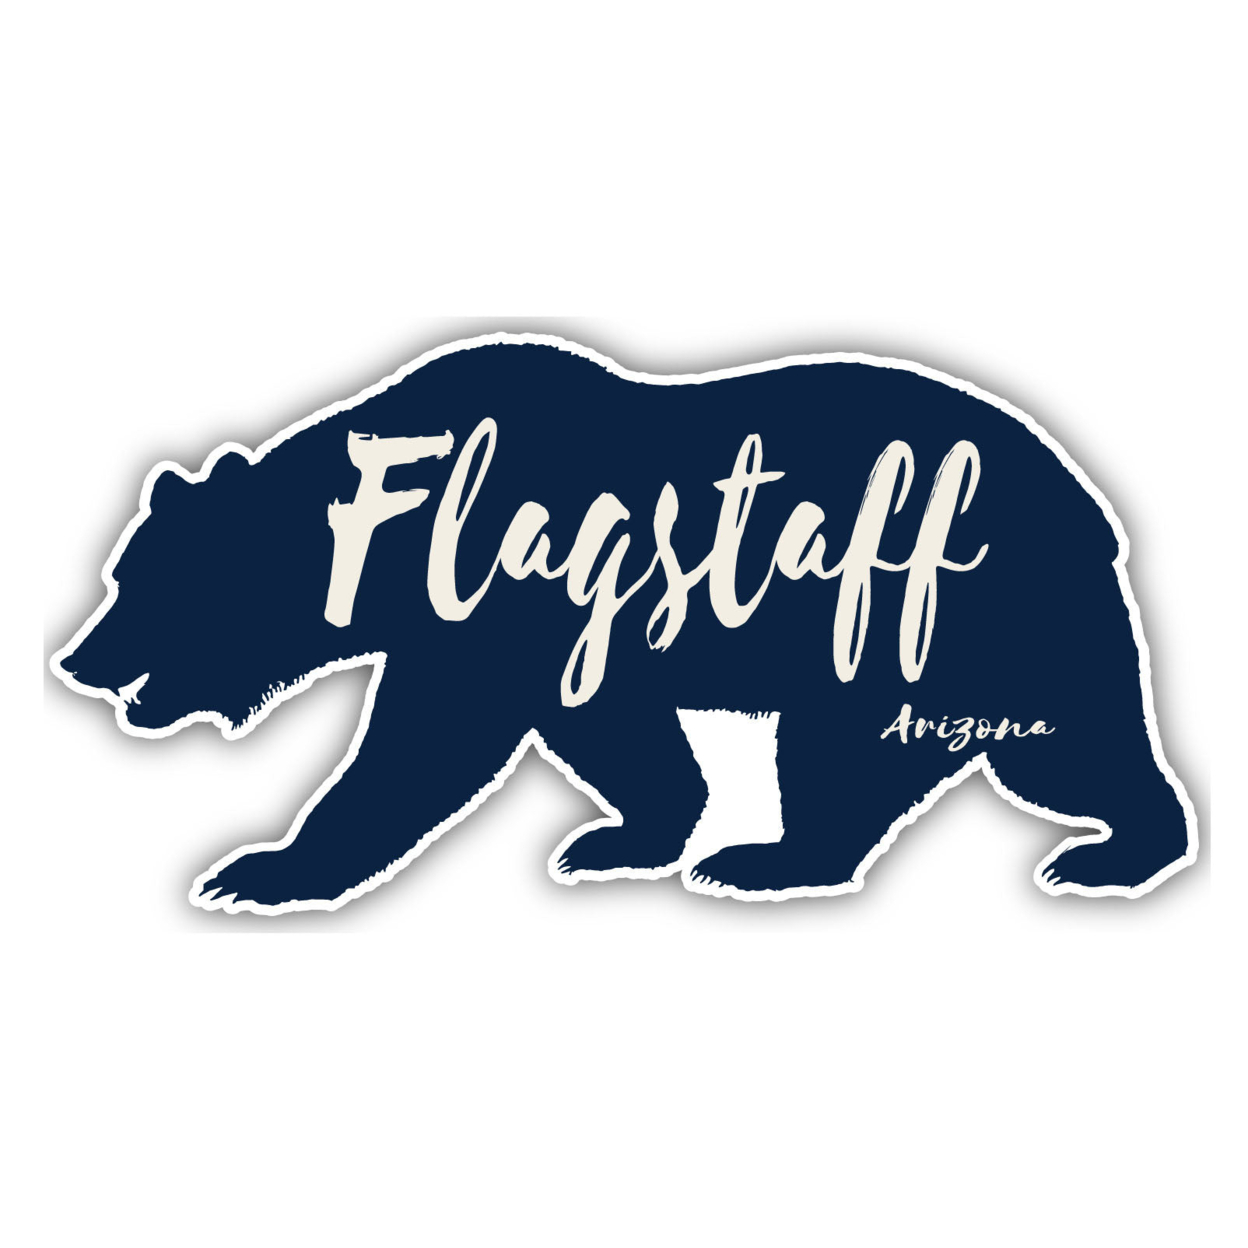 Flagstaff Arizona Souvenir Decorative Stickers (Choose Theme And Size) - 4-Pack, 6-Inch, Tent